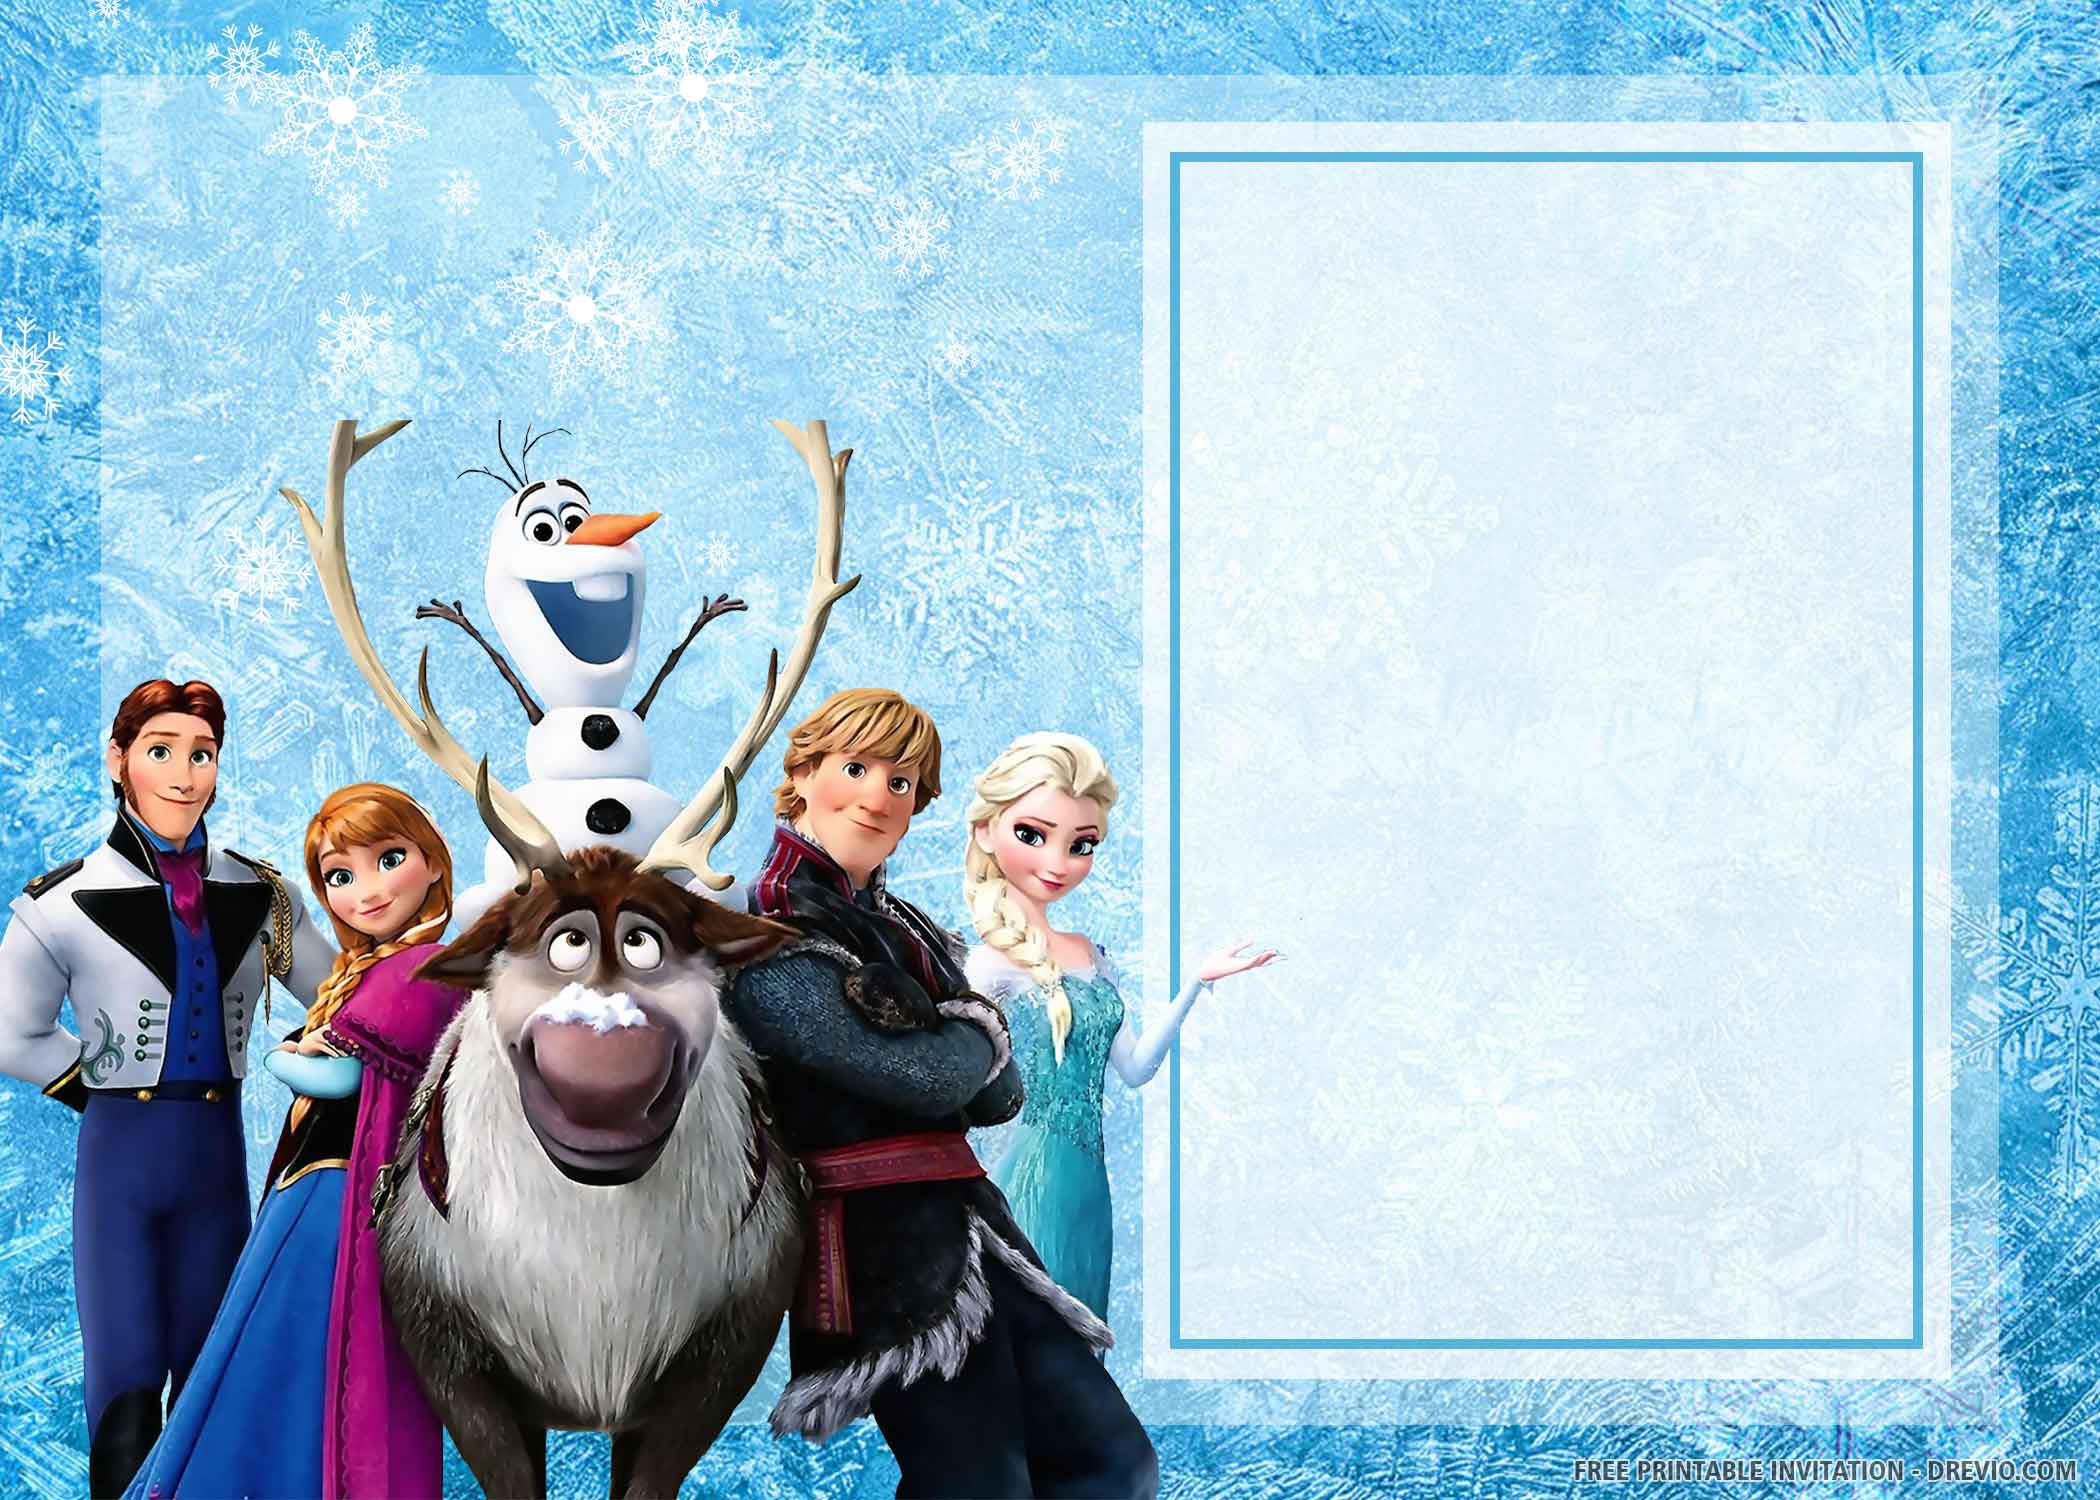 Details about   'YOU PRINT' FROZEN Anna Elsa Olaf Photo Birthday party  Invite Invitations Photo 